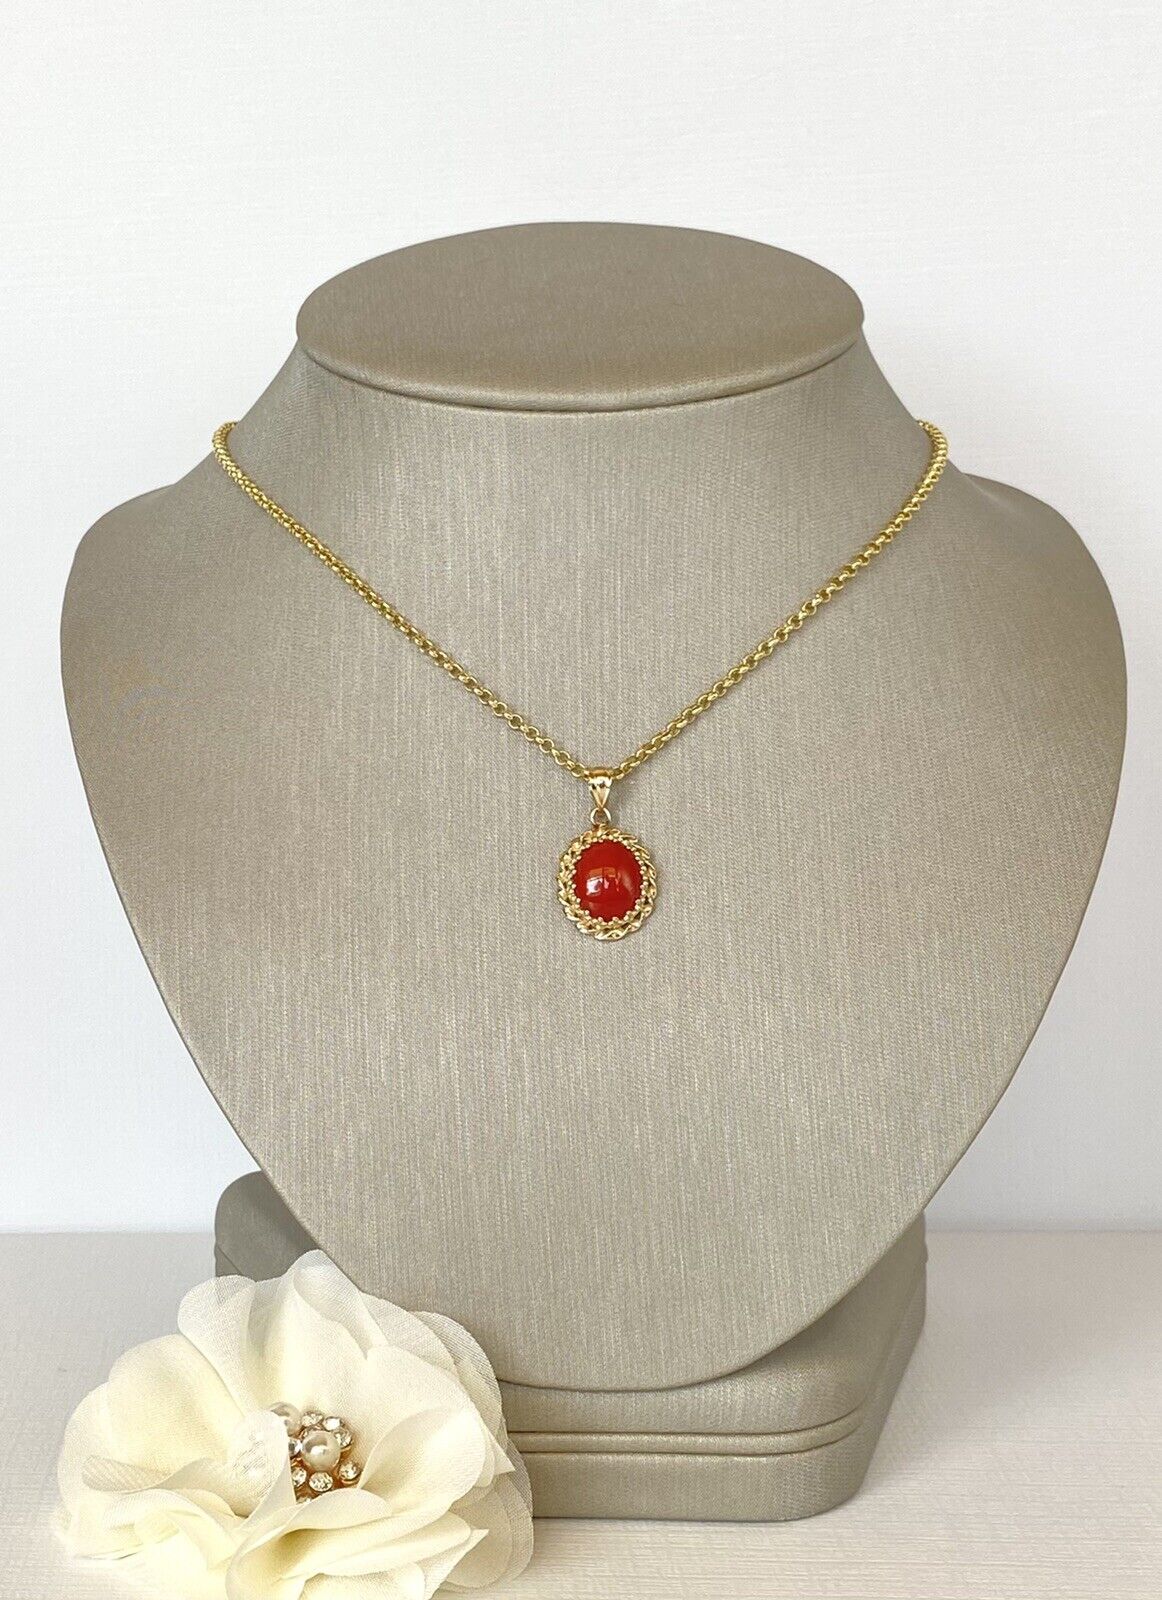 Lg Untreated Mediterranean Red Coral &14k Yellow Gold Handcrafted Pendant, New